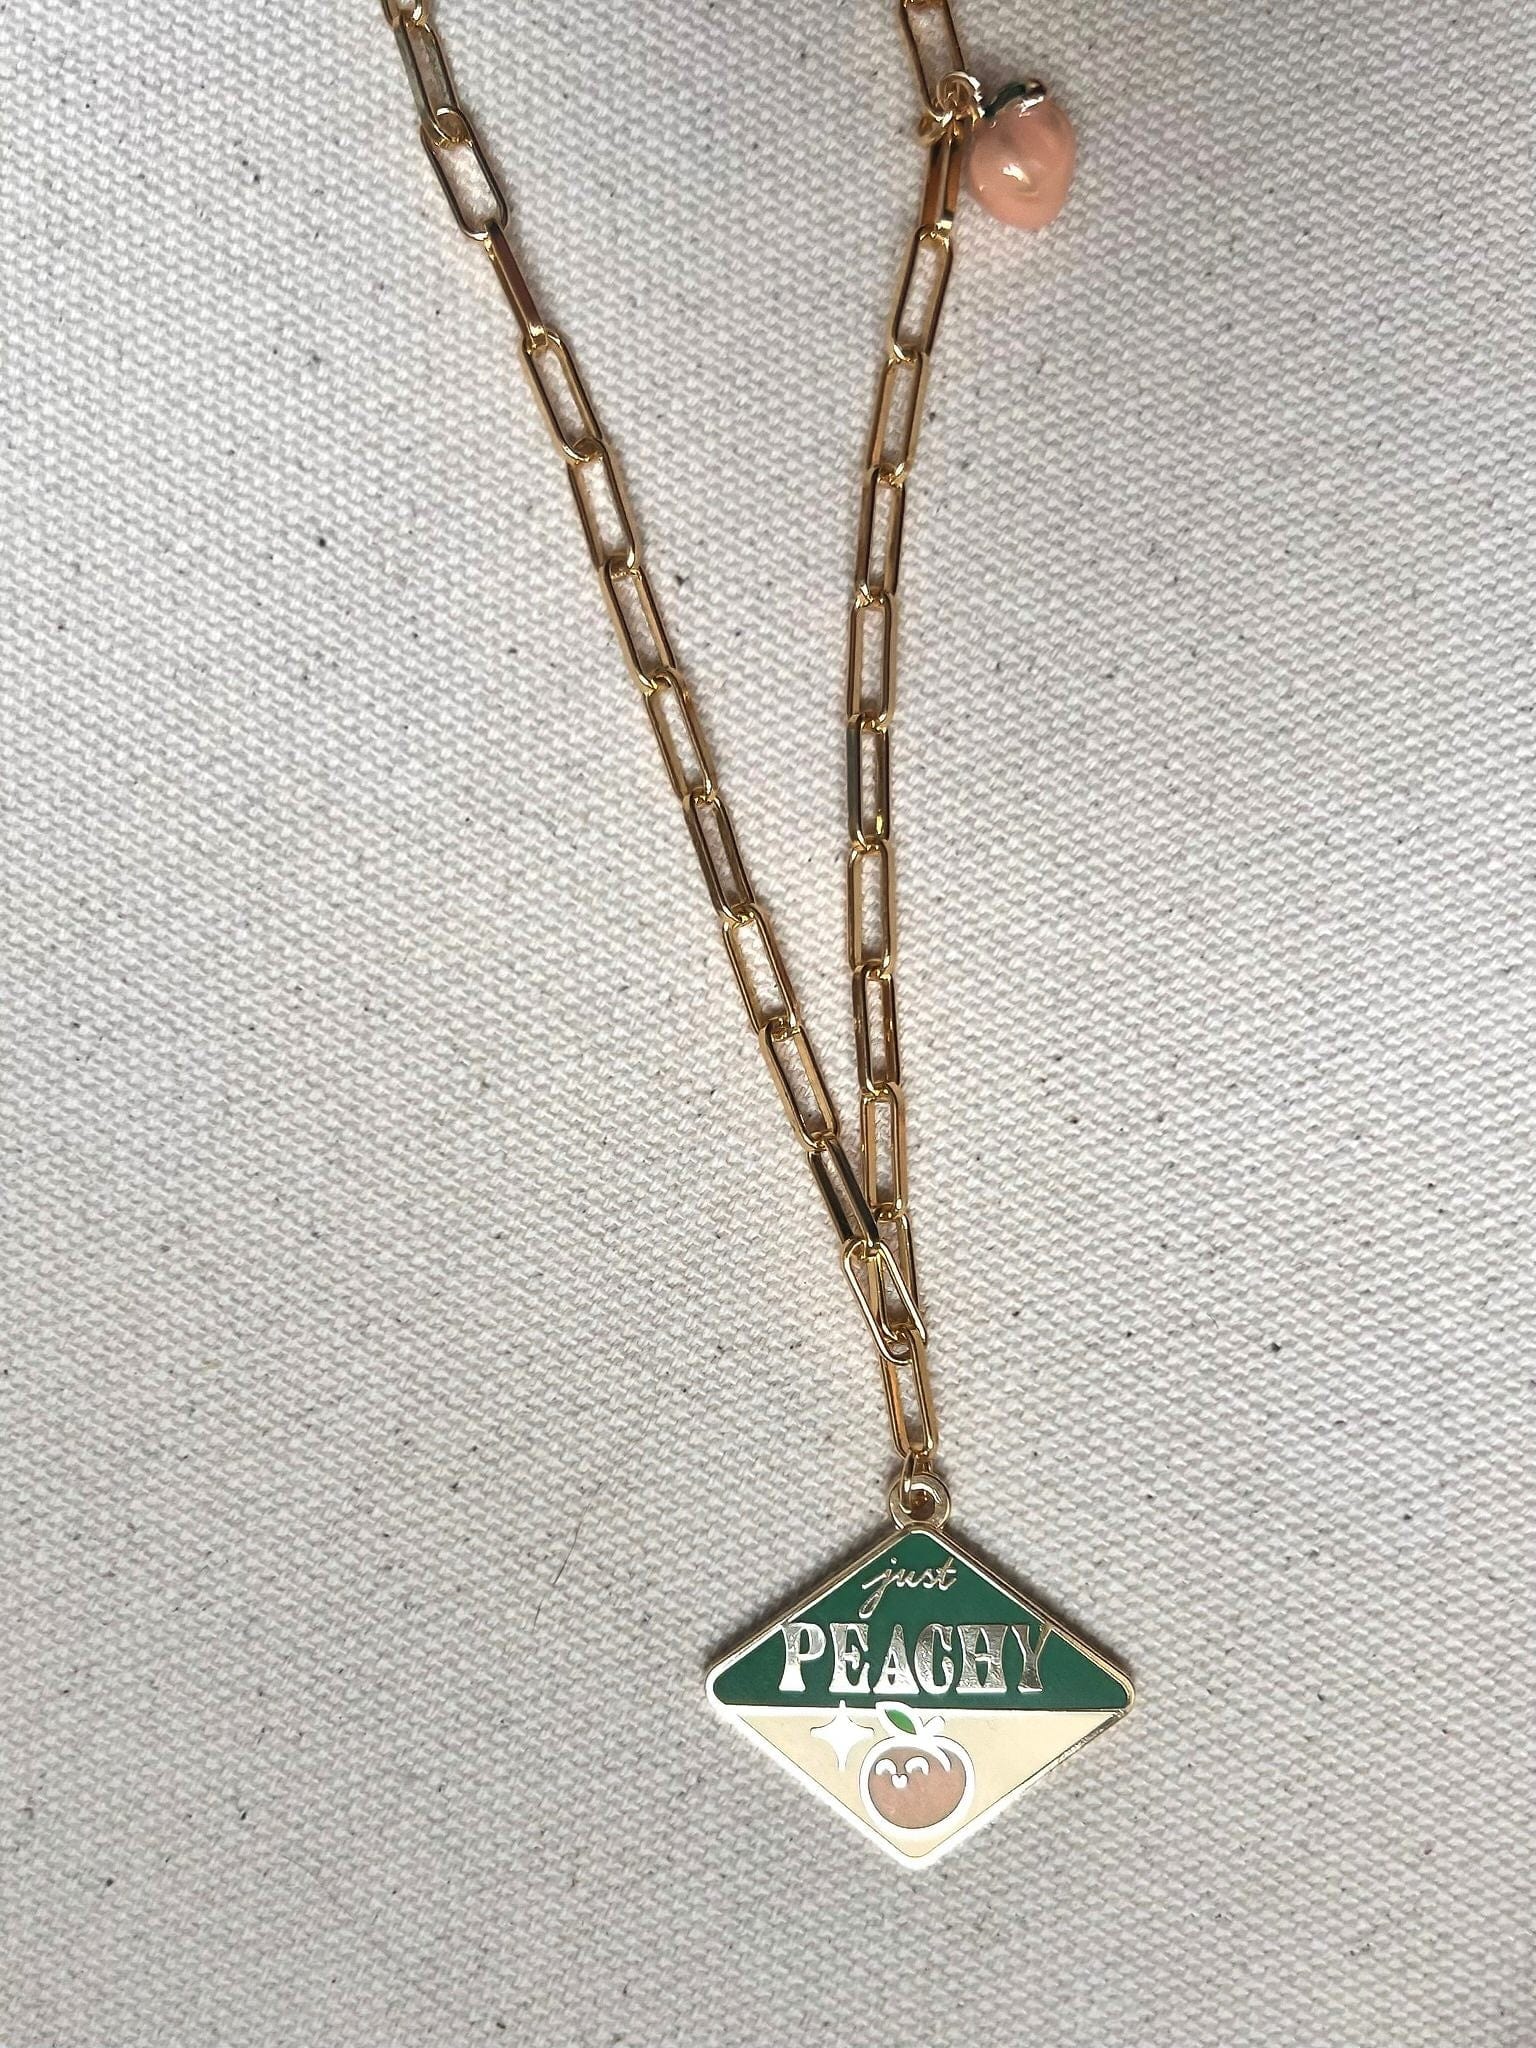 Just Peachy Necklace Necklaces Style 1 - Medium paperclip chain: 60cm (ca.24”) Necklace